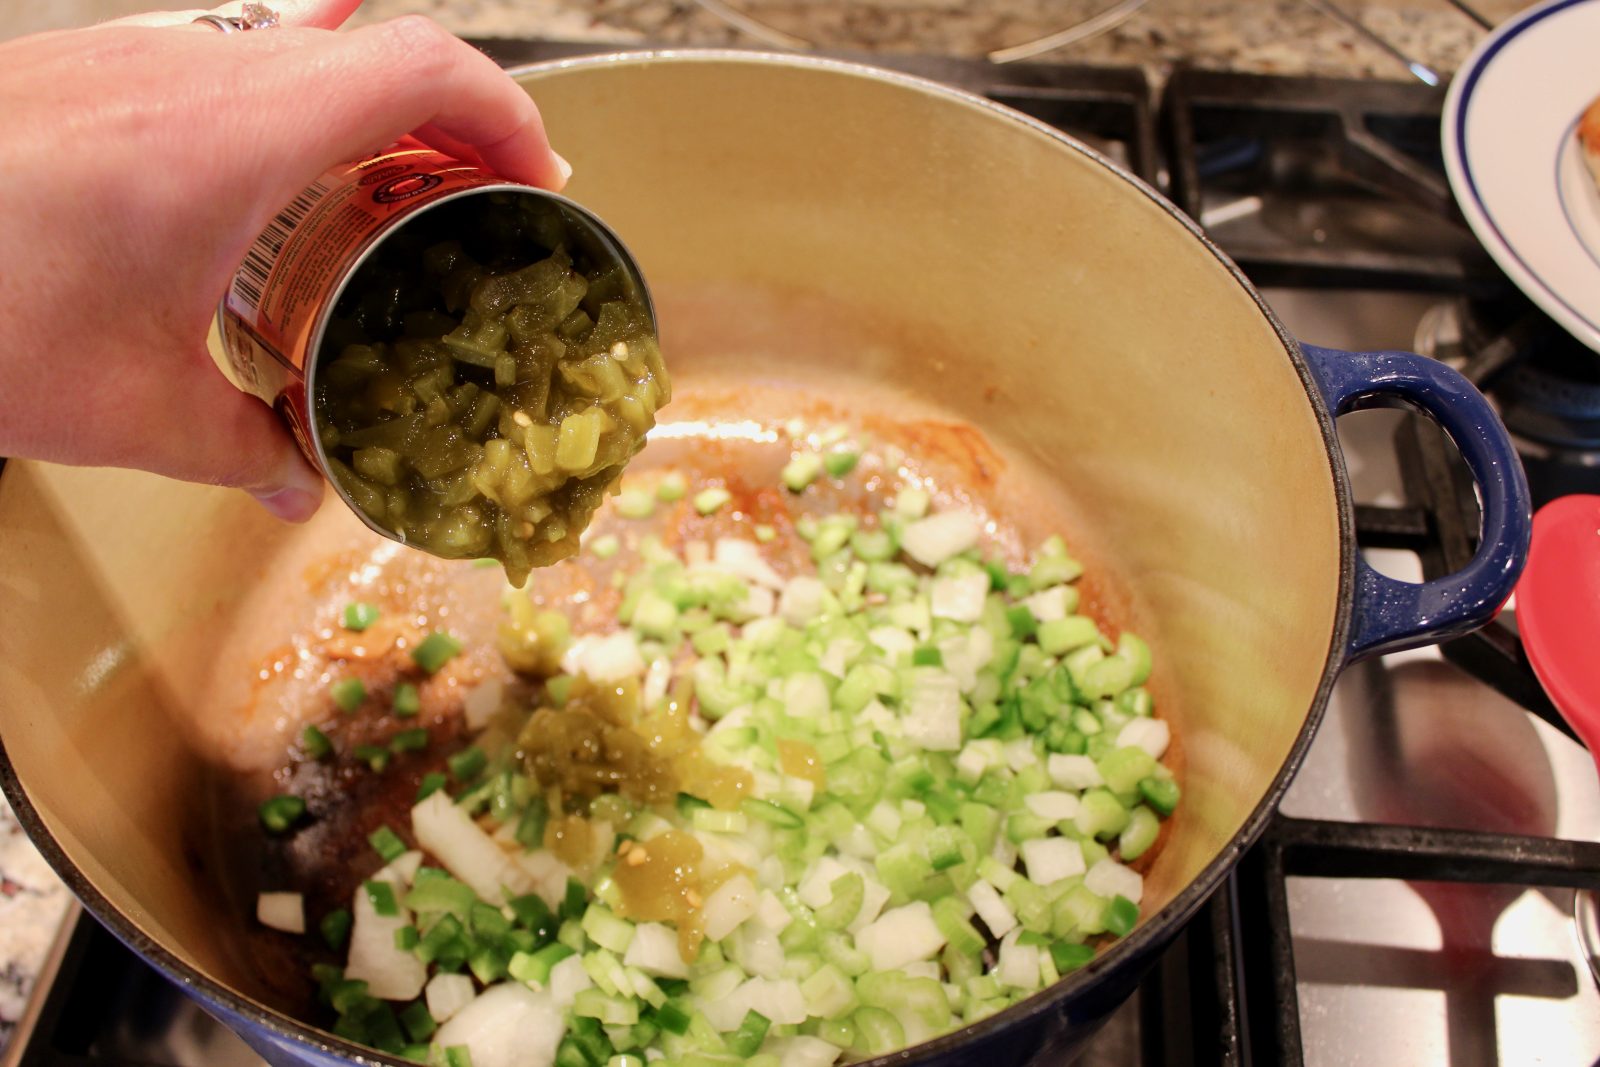 Recipe photo for White Chicken Chili showing adding a can of chopped green chilies to a blue LeCreuset dutch oven with chopped celery, onion and jalapeño already in pot.  Pot is on a gas stove.